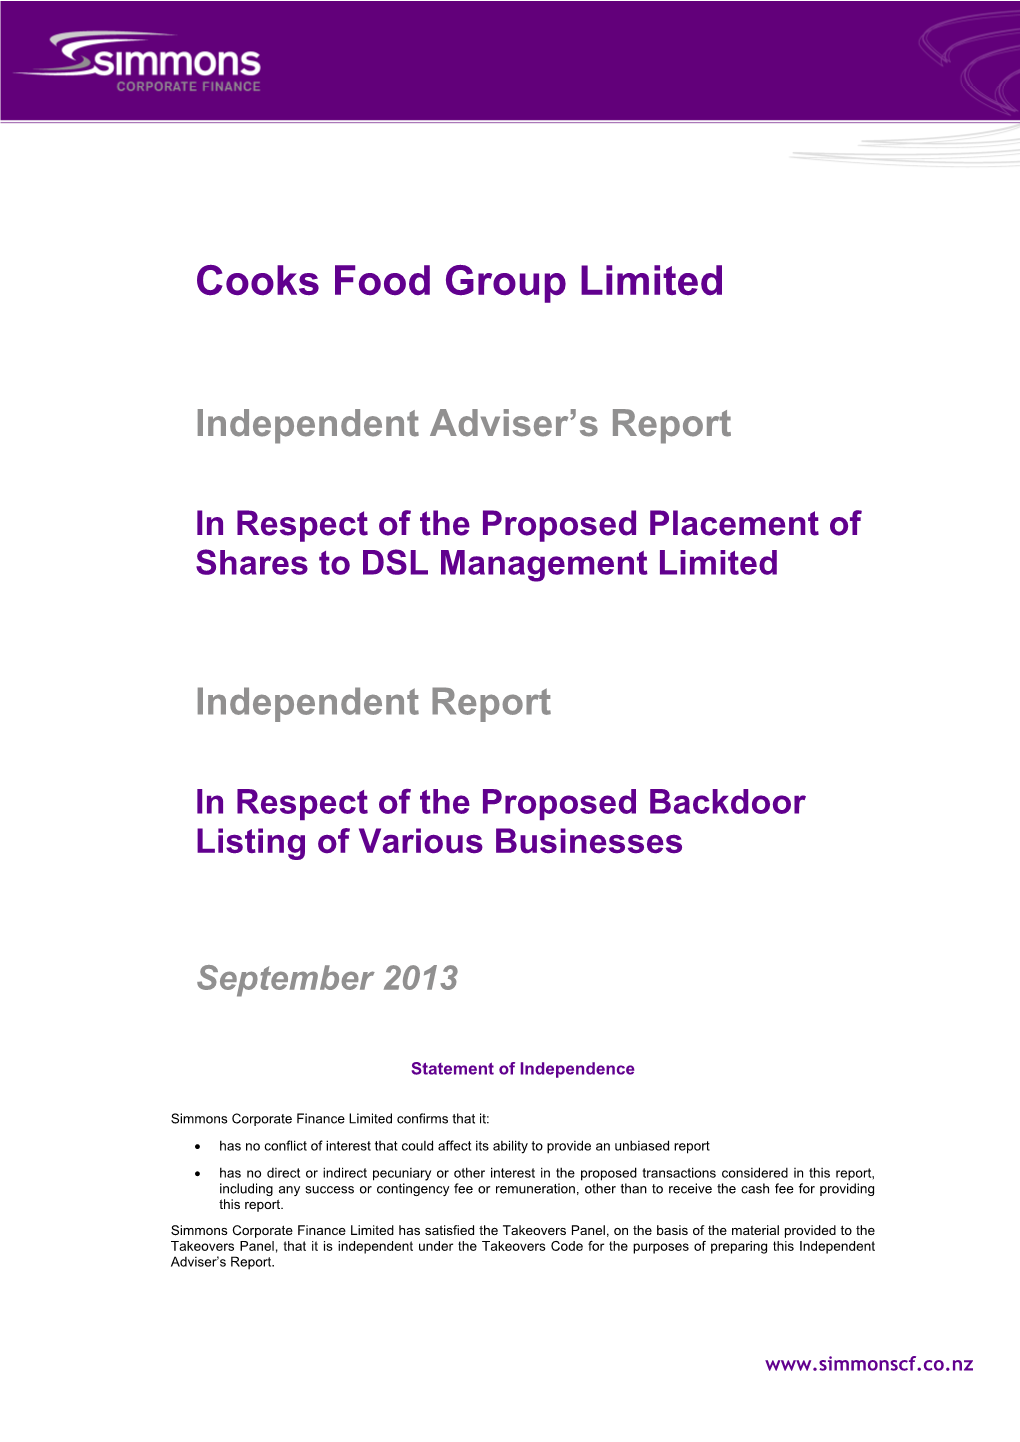 Cooks Food Group Limited 2013 Independent